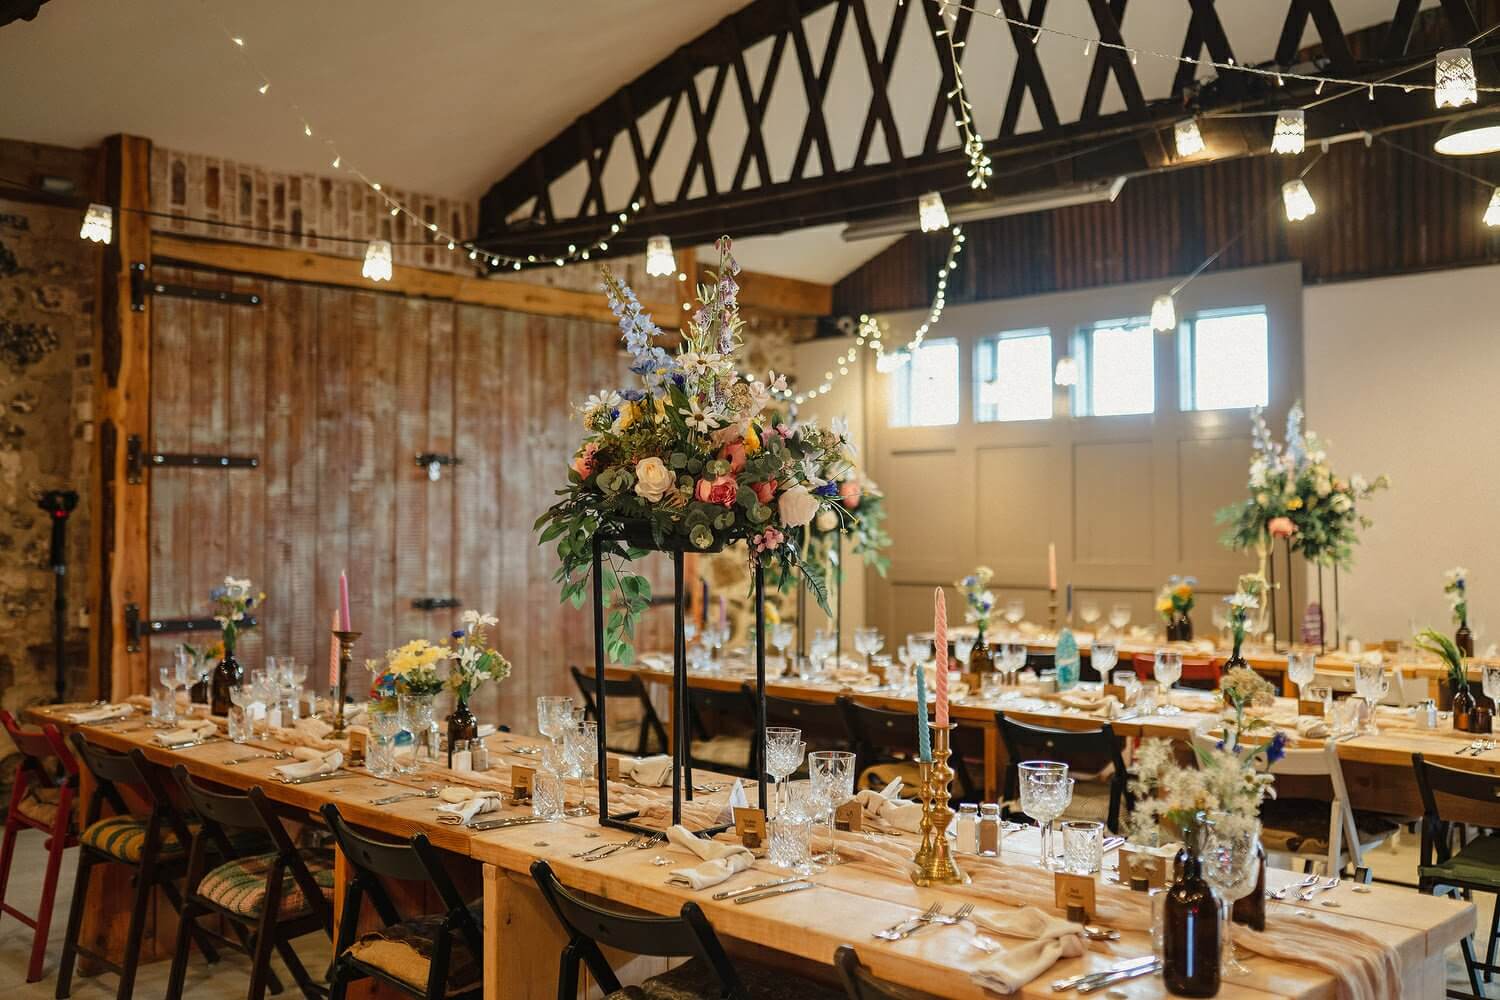 Rustic barn wedding reception with elegantly set long wooden tables, tall floral centerpieces, and string lights, creating a cozy and inviting atmosphere.